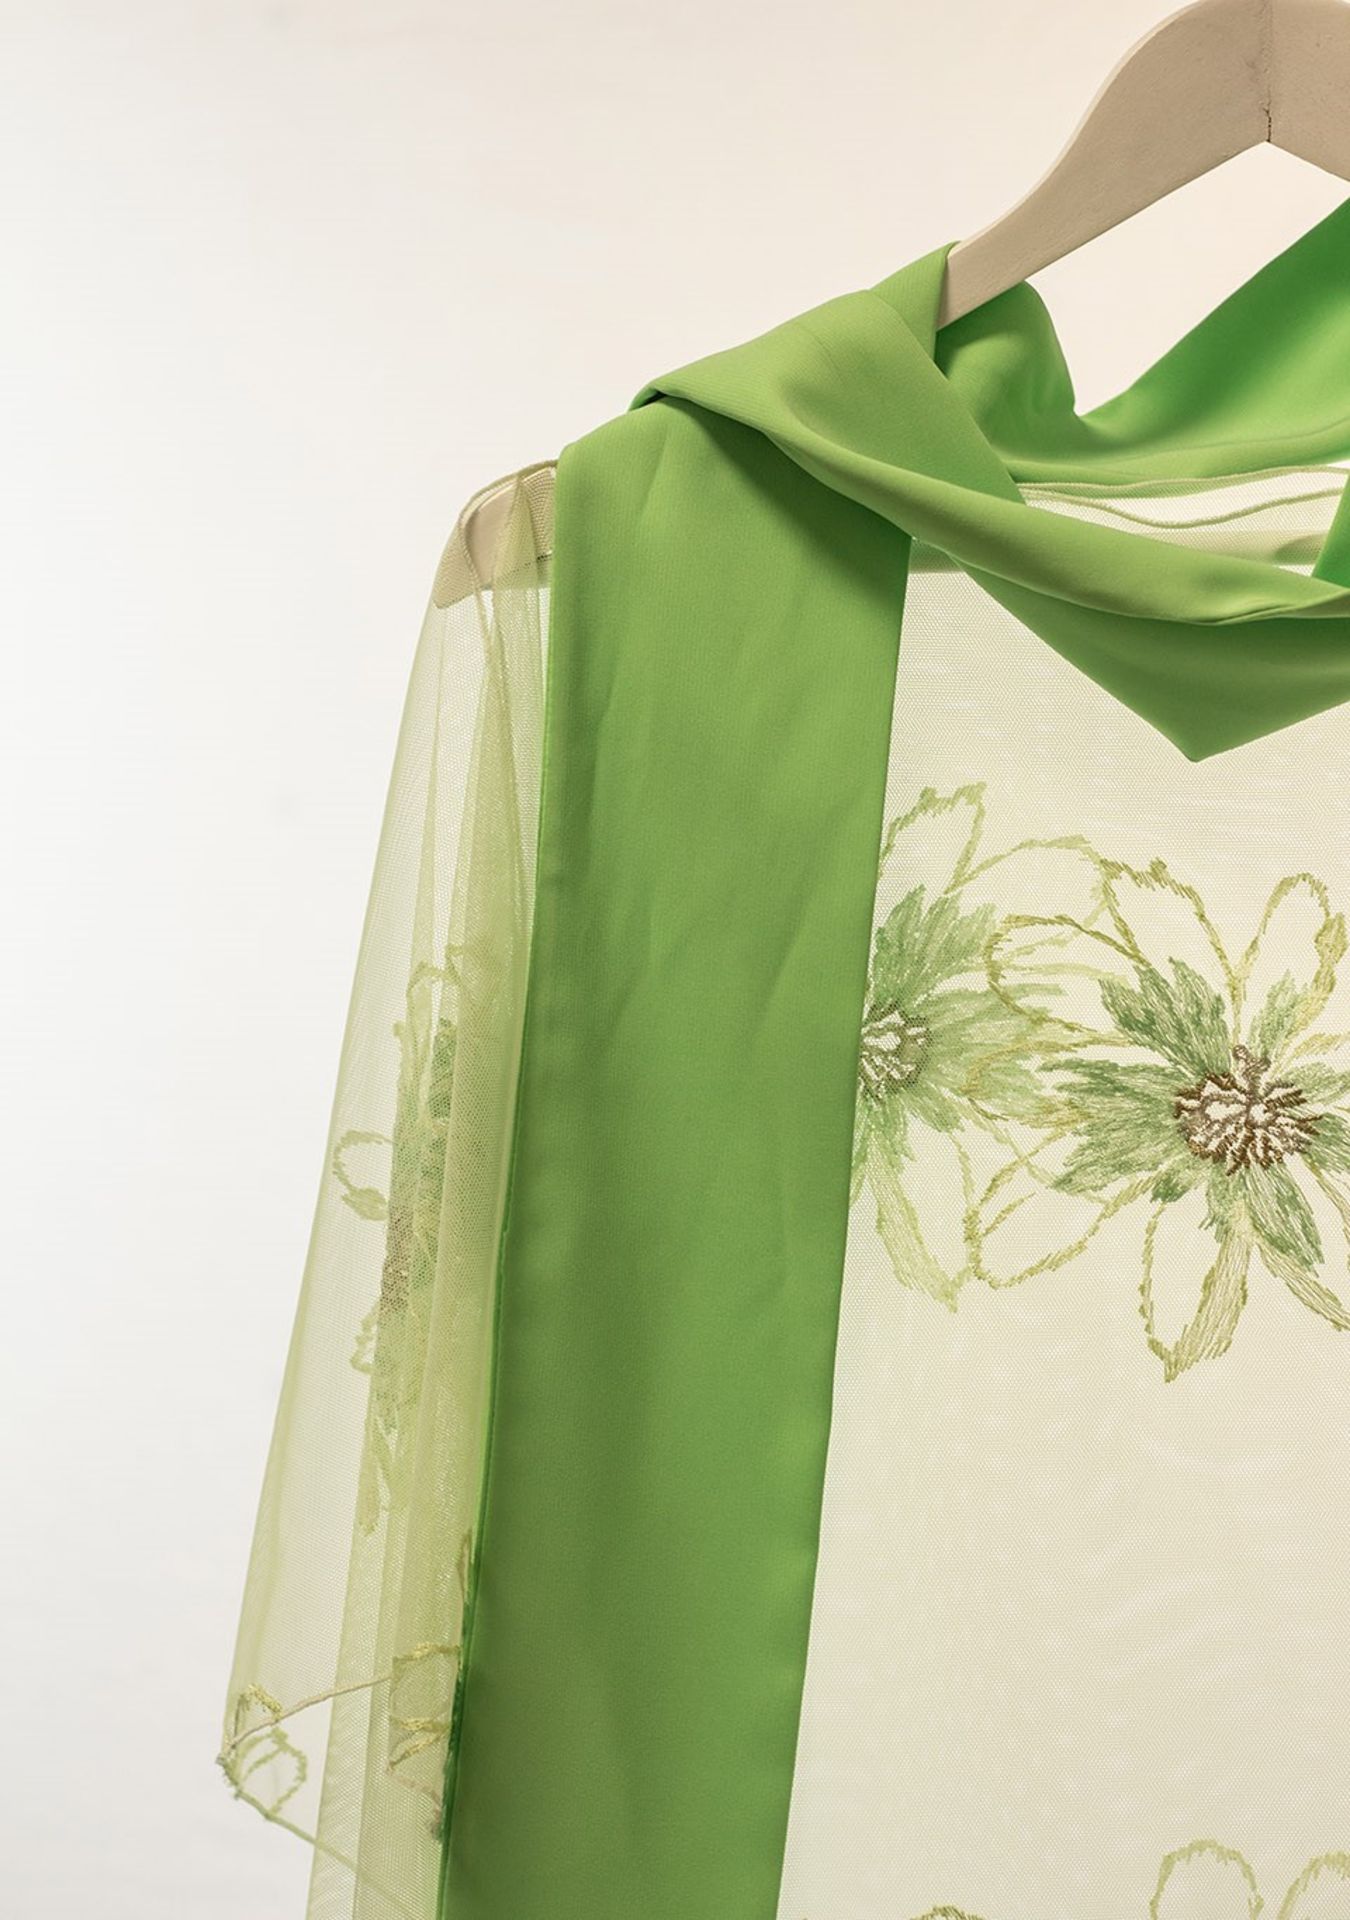 1 x Boutique Le Duc Green Skirt With Matching Scarf And Shawl - Size: 8 - Material: 100% Silk - From - Image 6 of 10